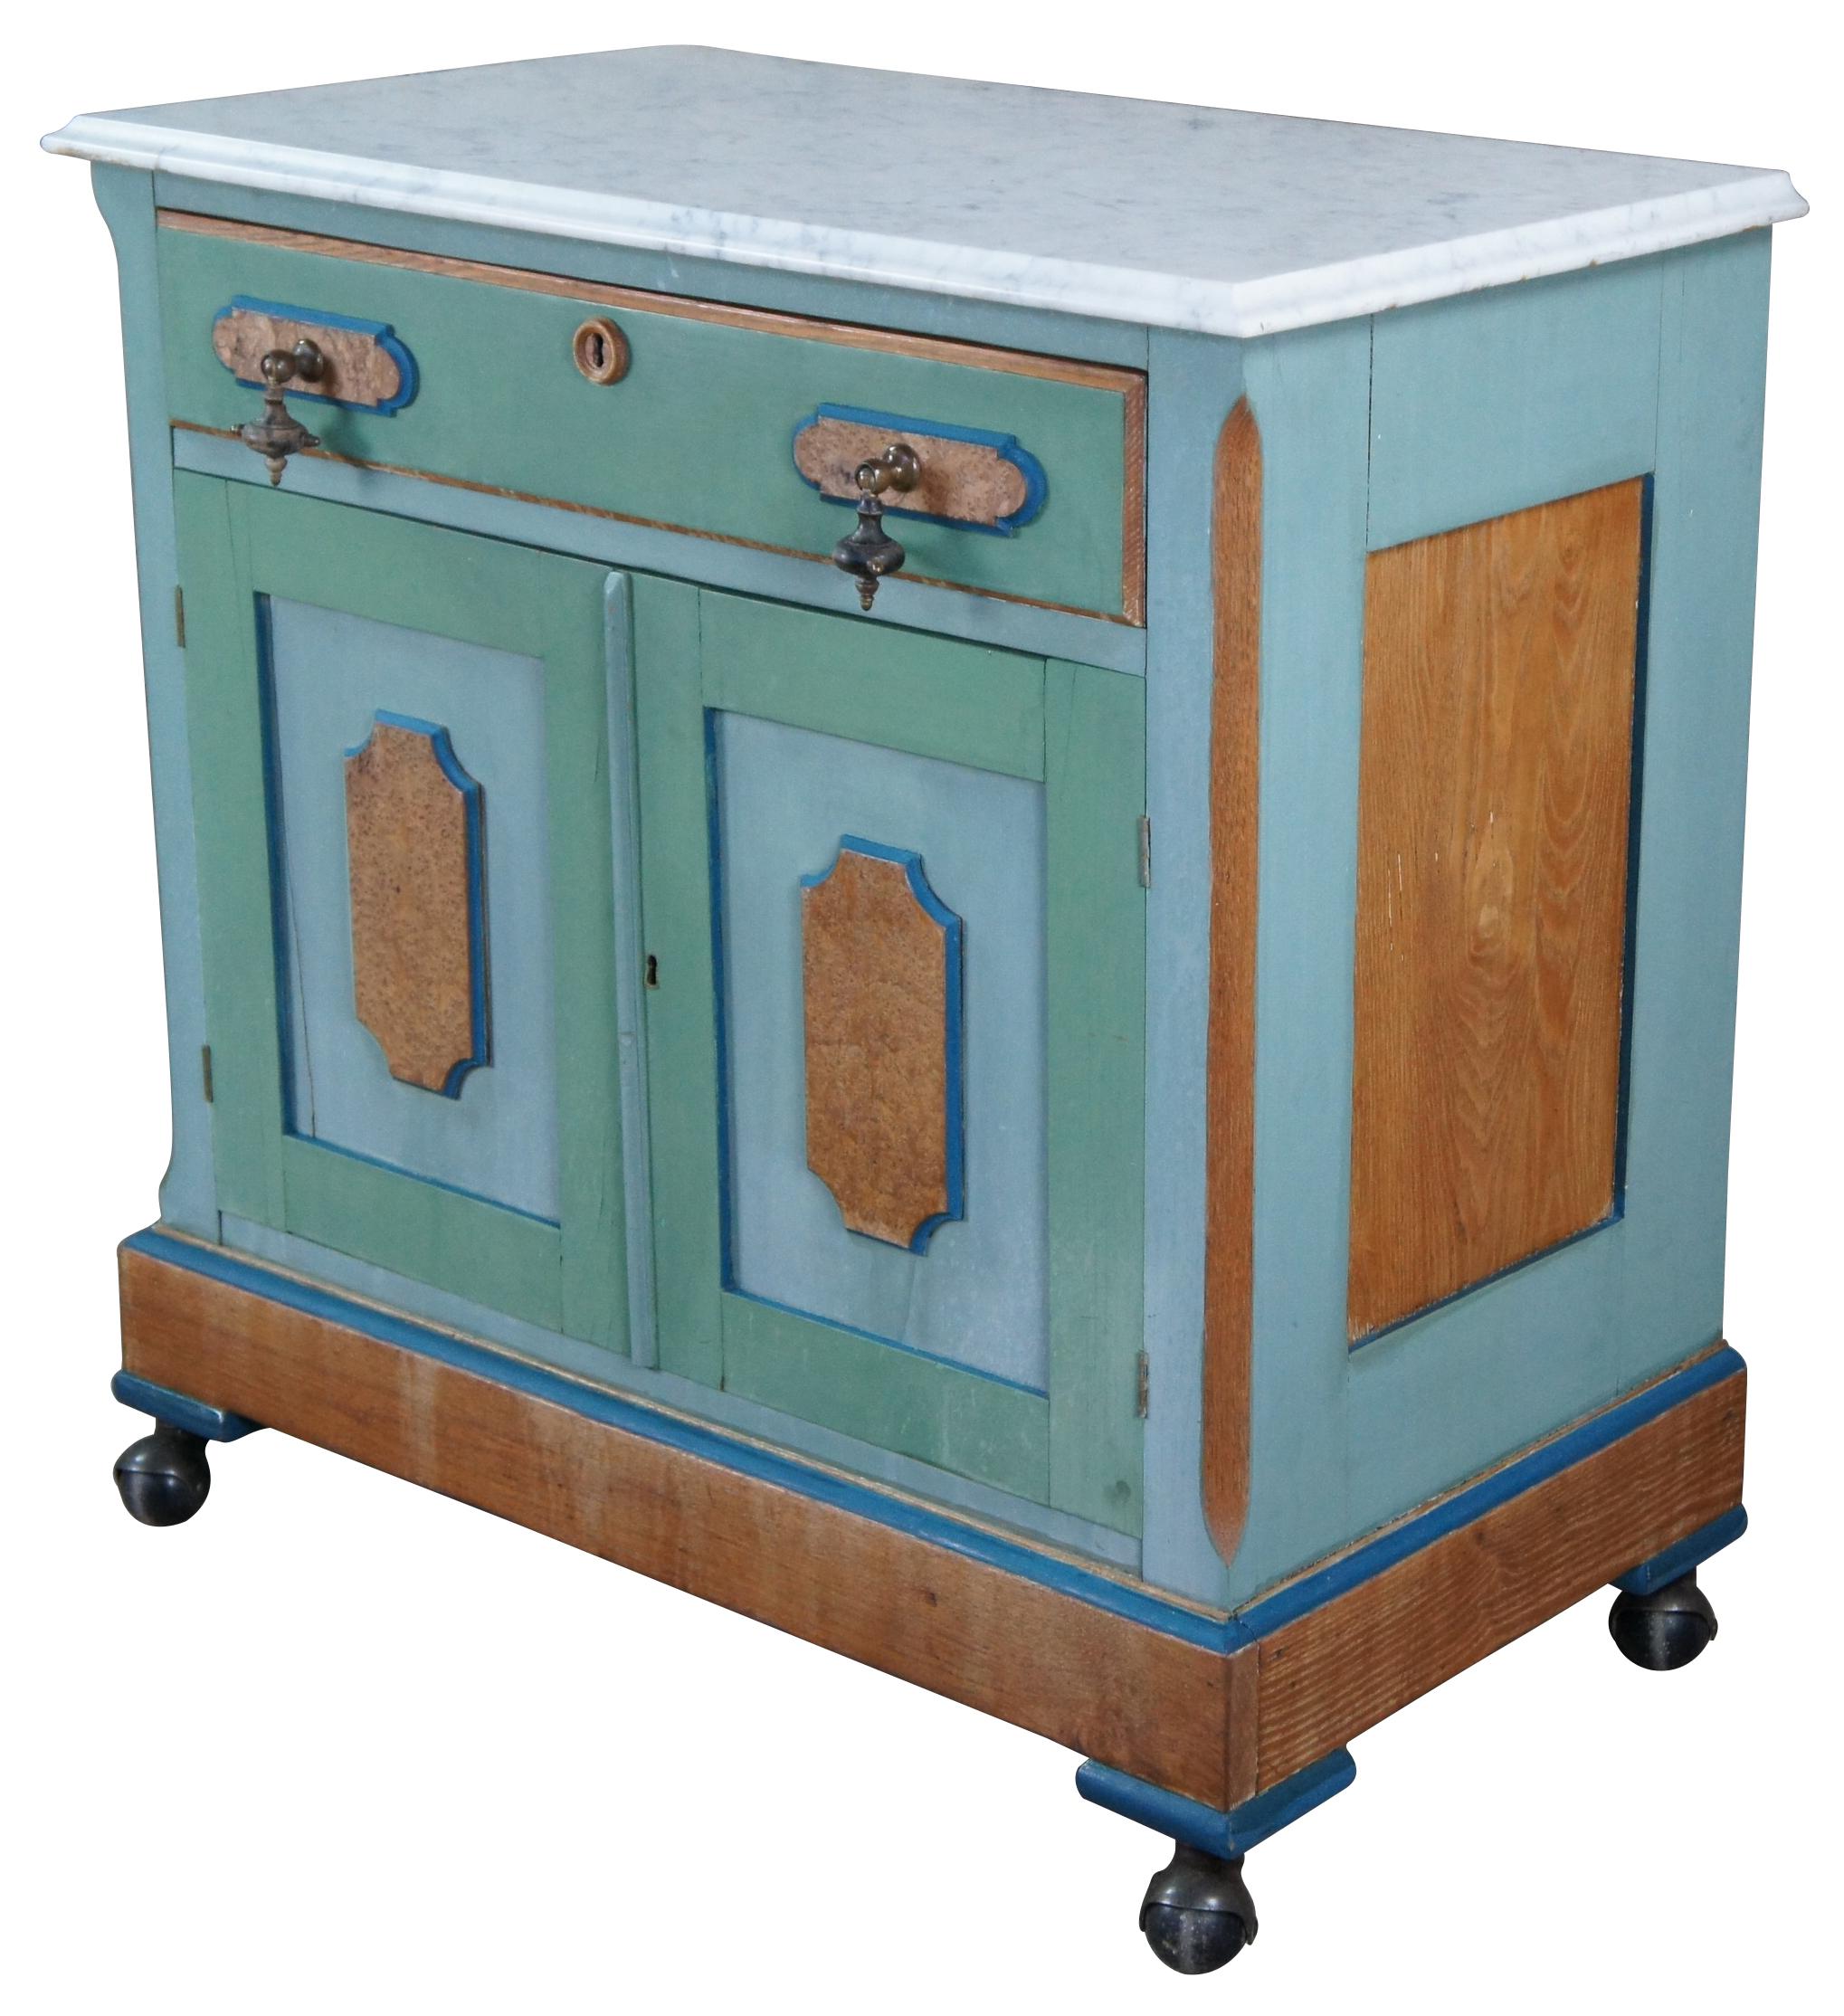 Antique Victorian Eastlake wash stand. Made of oak featuring birdseye maple panels with painted accents, marble top, lower cabinet, and a drawer with brutalist tear drop pulls.
   